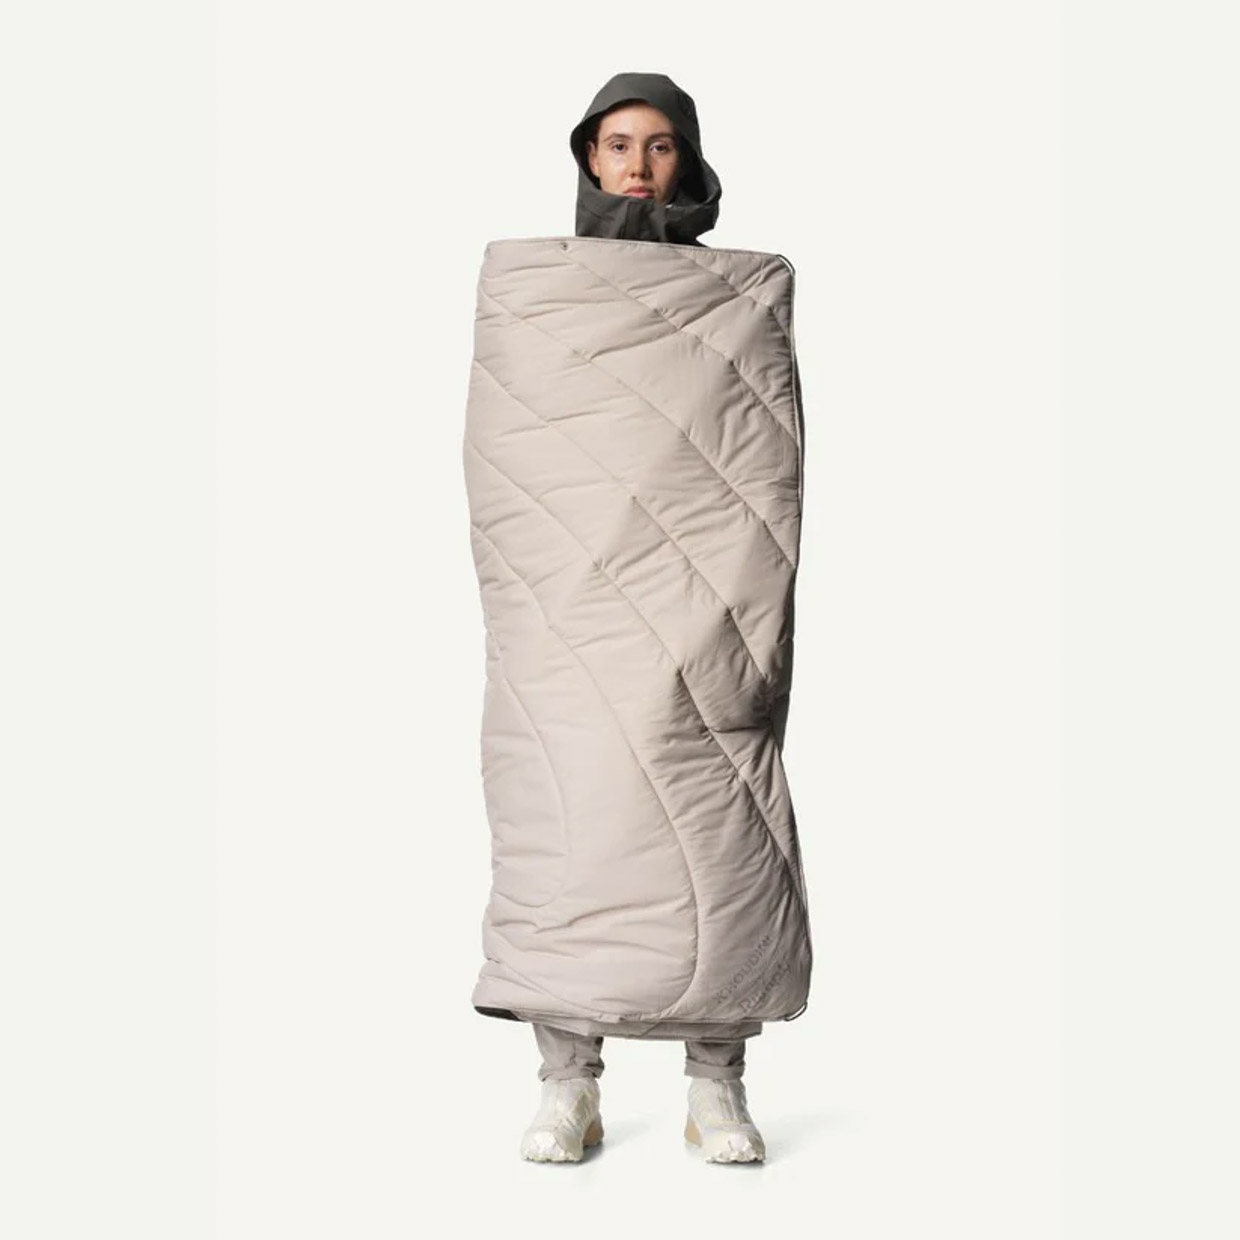 Rumpl x Houdini Reconnect Puffy Blanket Keeps You Dry and Toasty